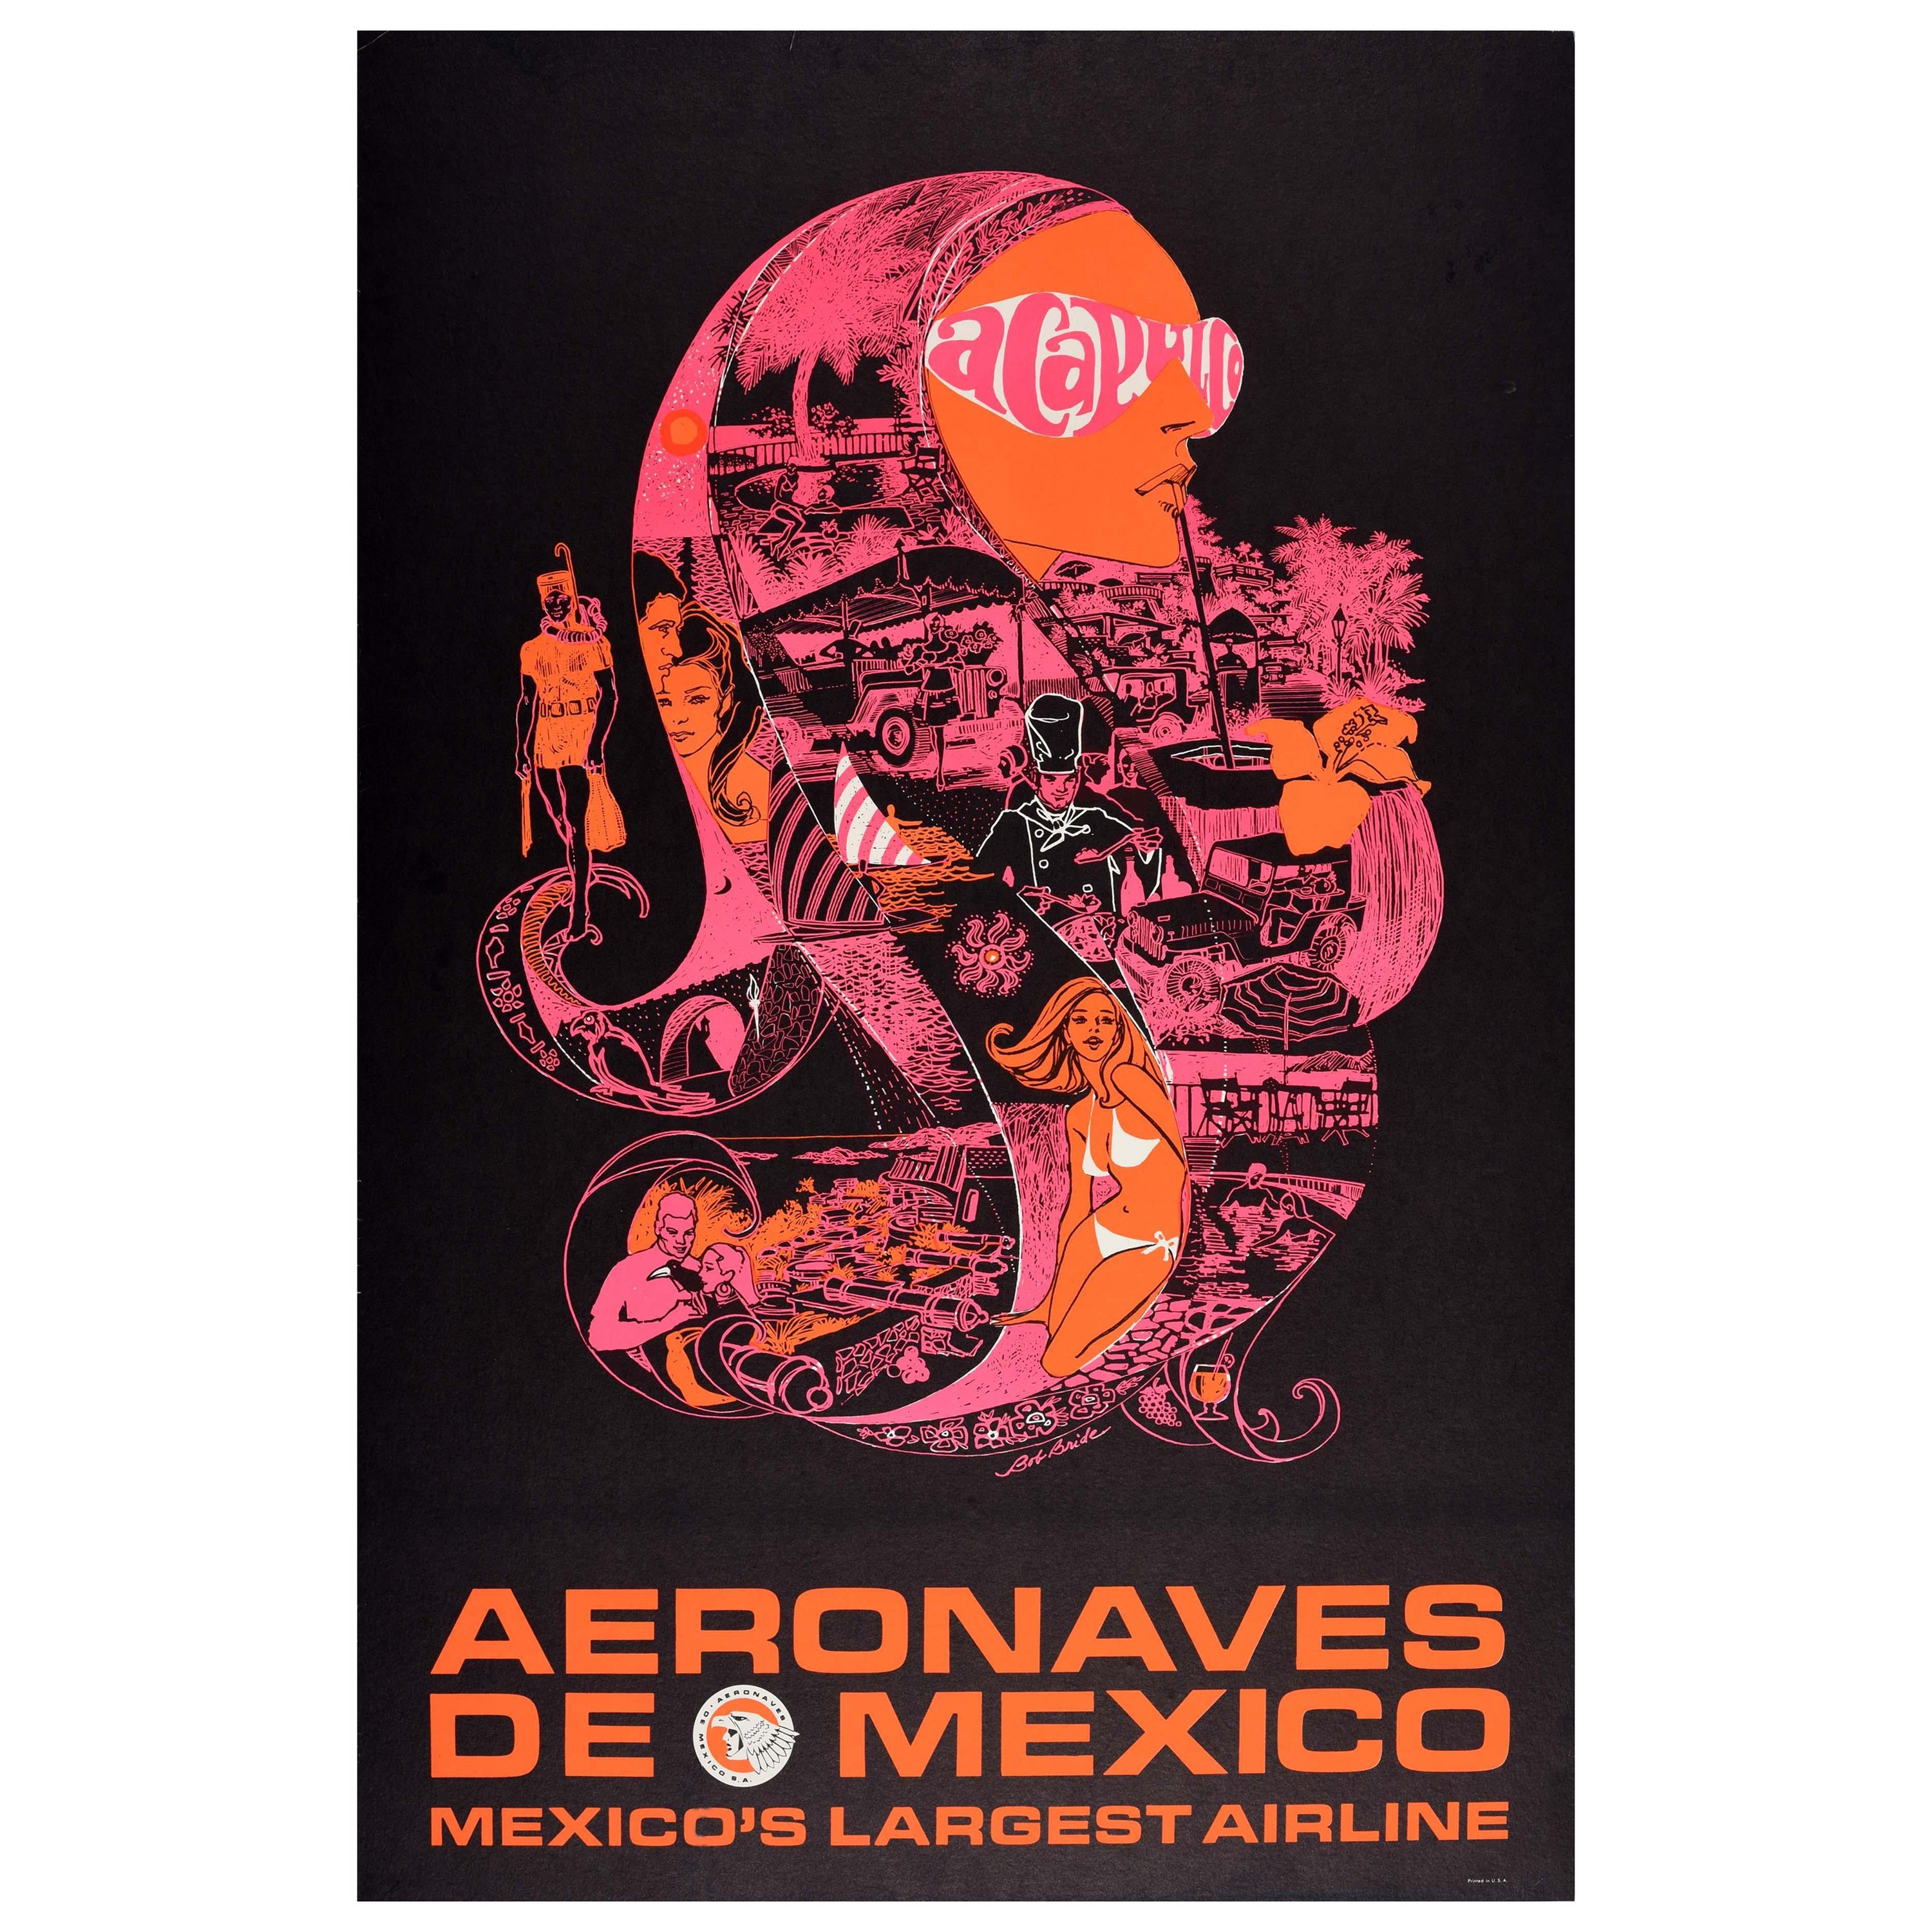 Acapulco Mexico American Airlines Mexican Travel Advertisement Art Print 